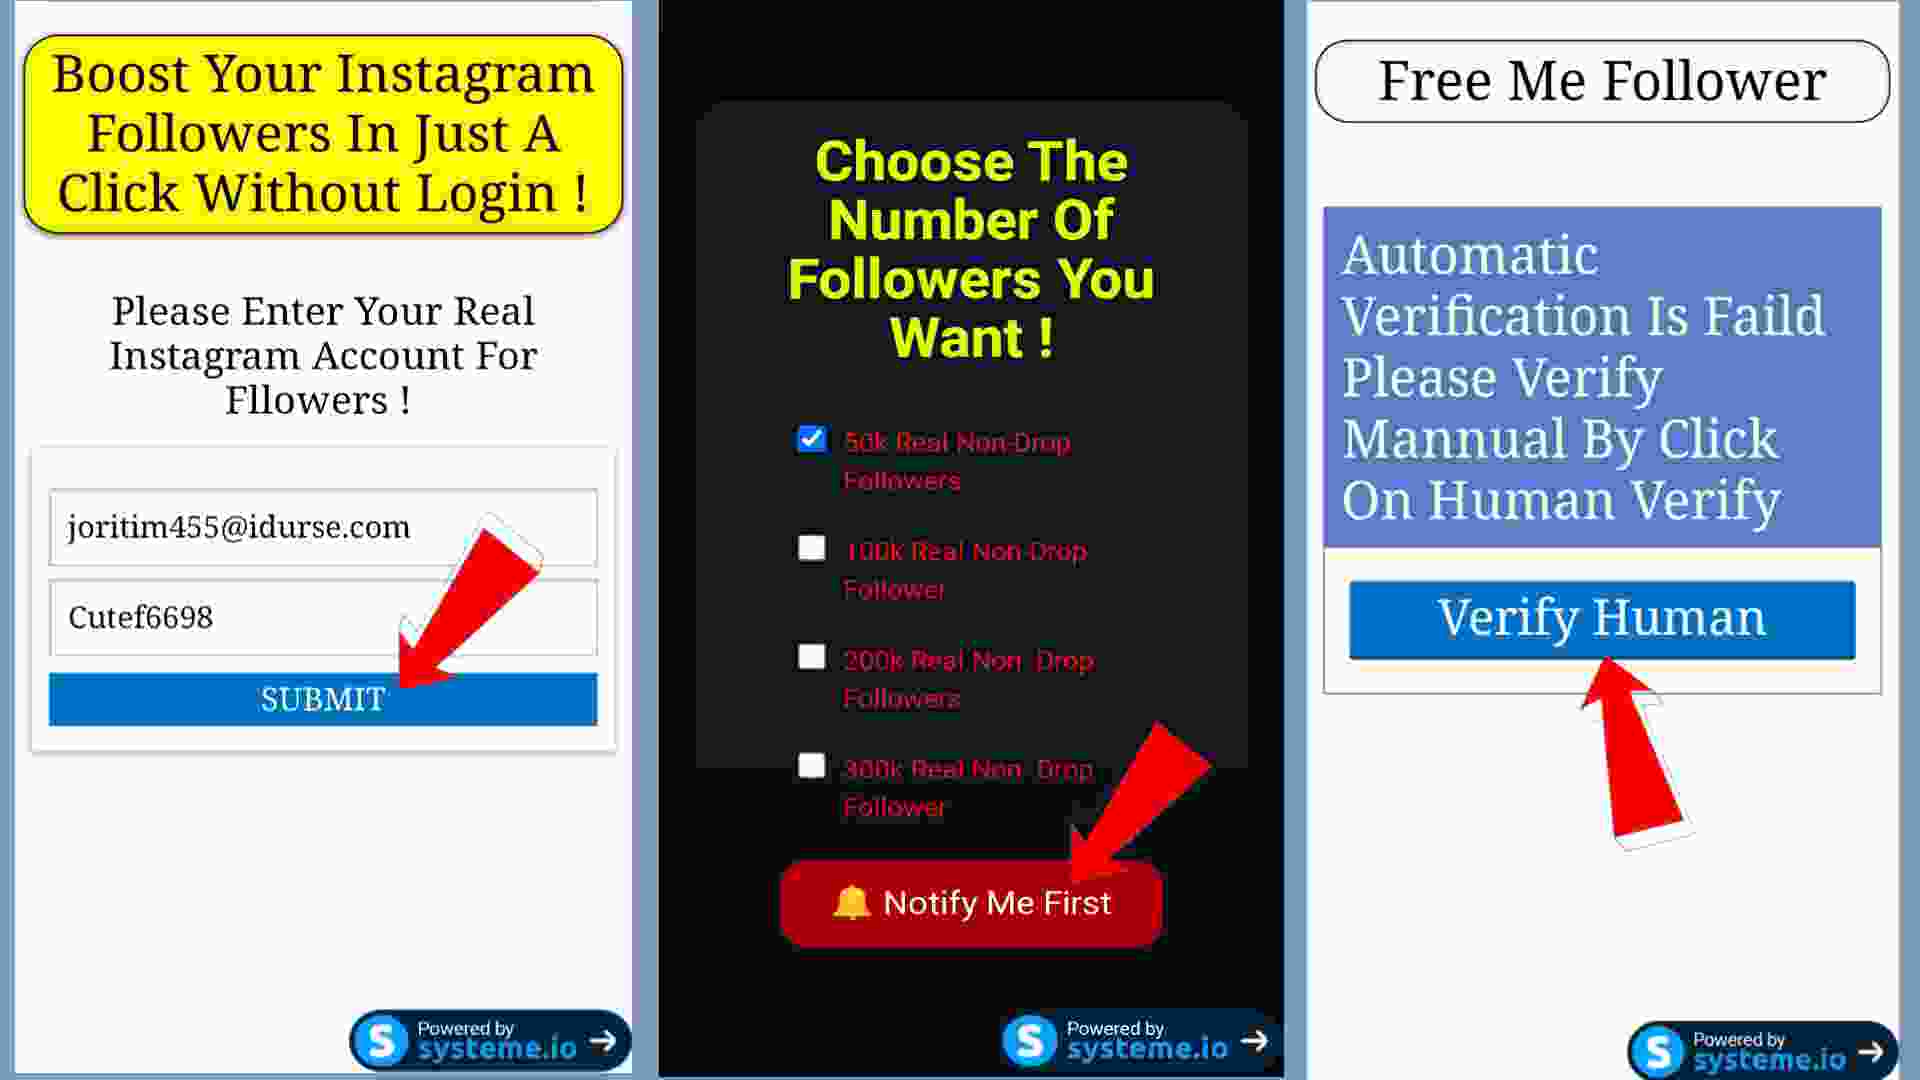 ig free me le lo- Best Site For Instagram Followers